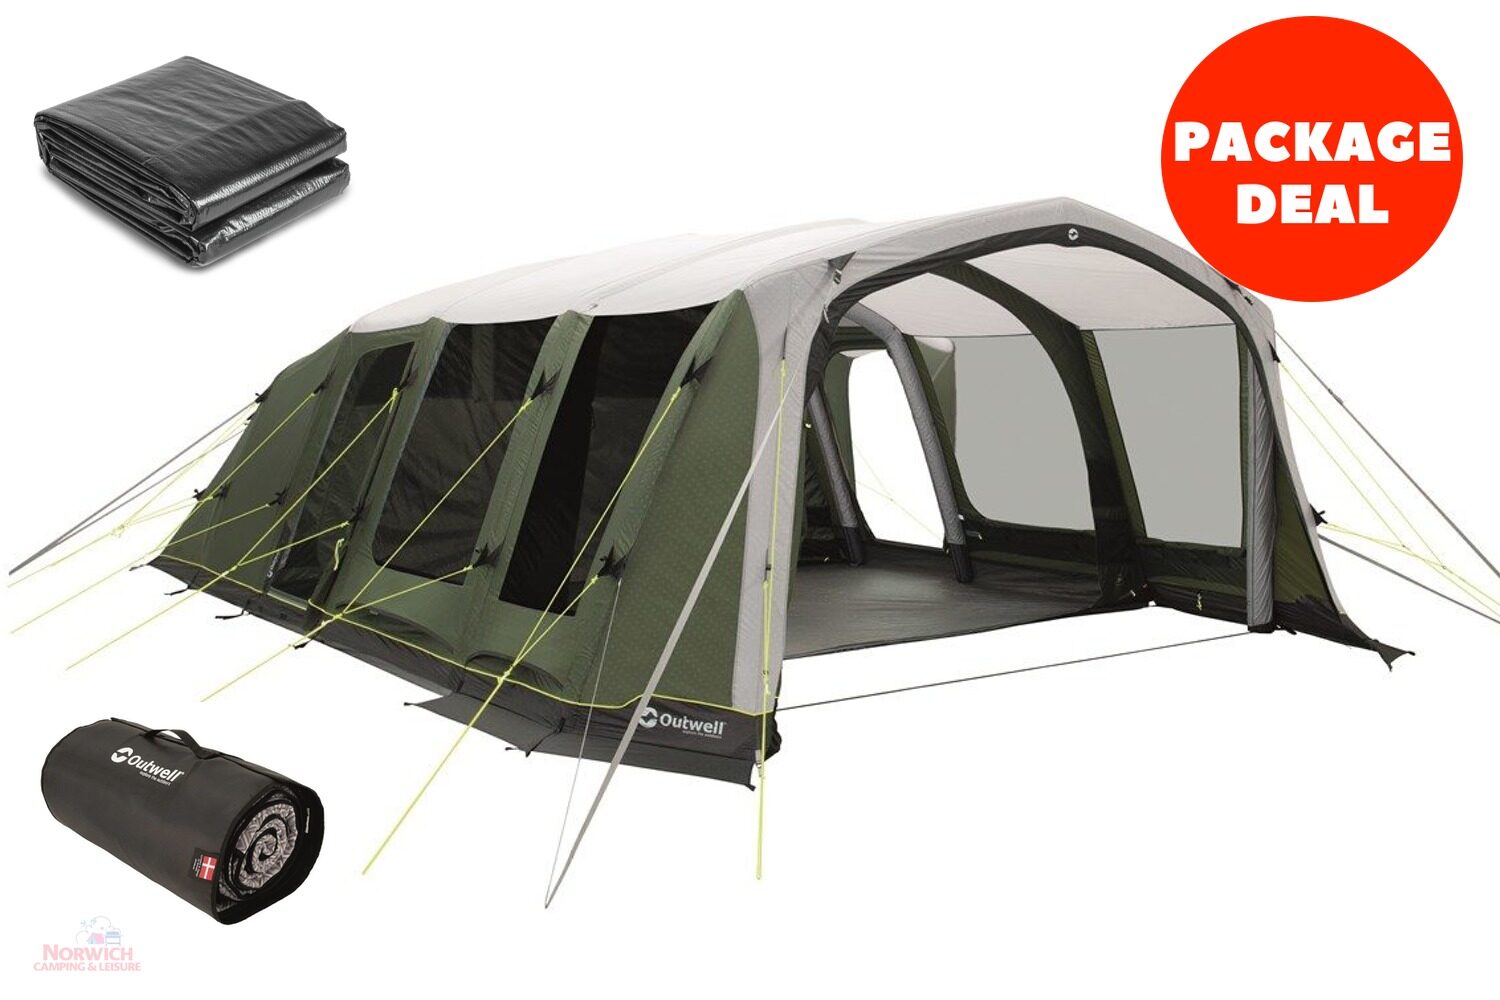 Outwell Sundale 7Pa Air Tent Package Deal